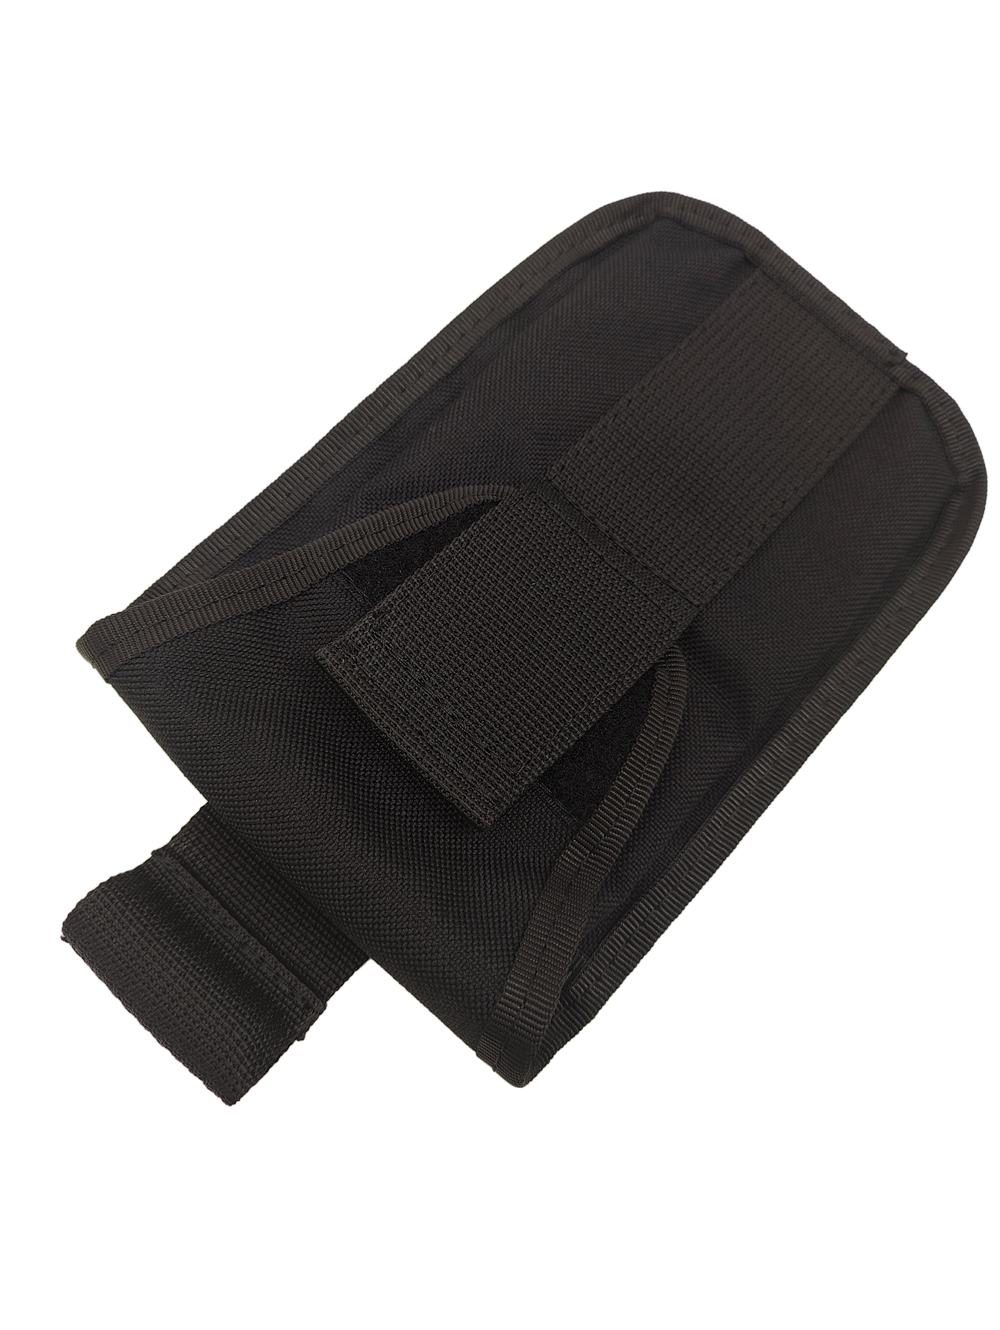 FinnSub TECH WEIGHT POCKET INNER POUCH FOR FRONT